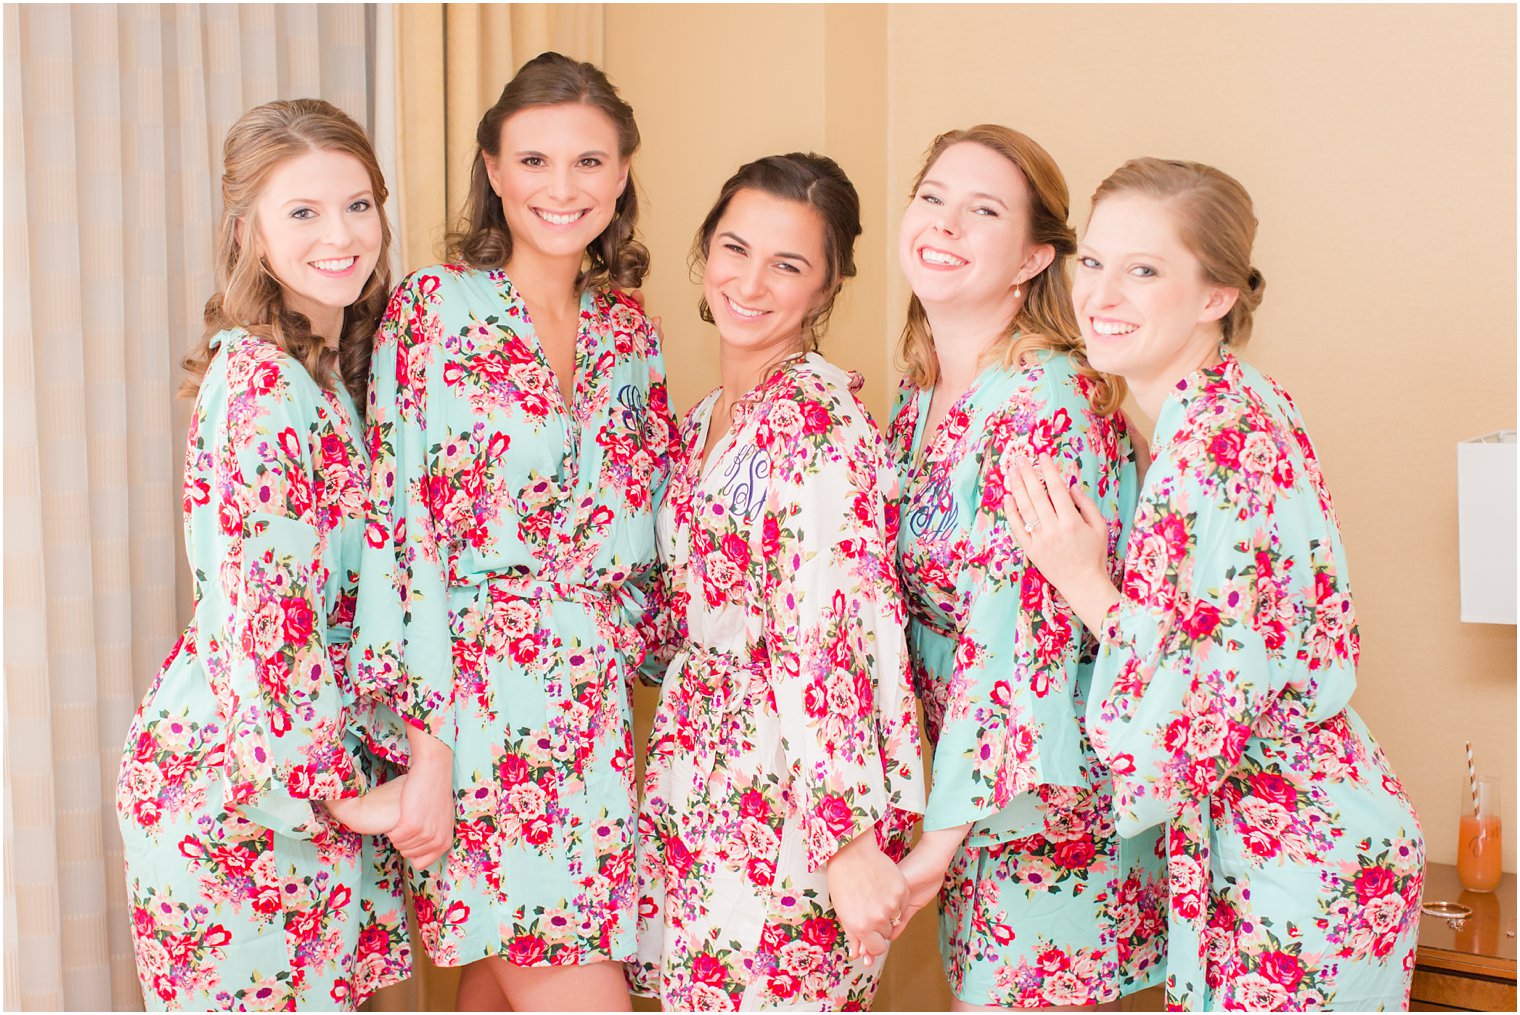 Bridesmaids in mismatched floral robes